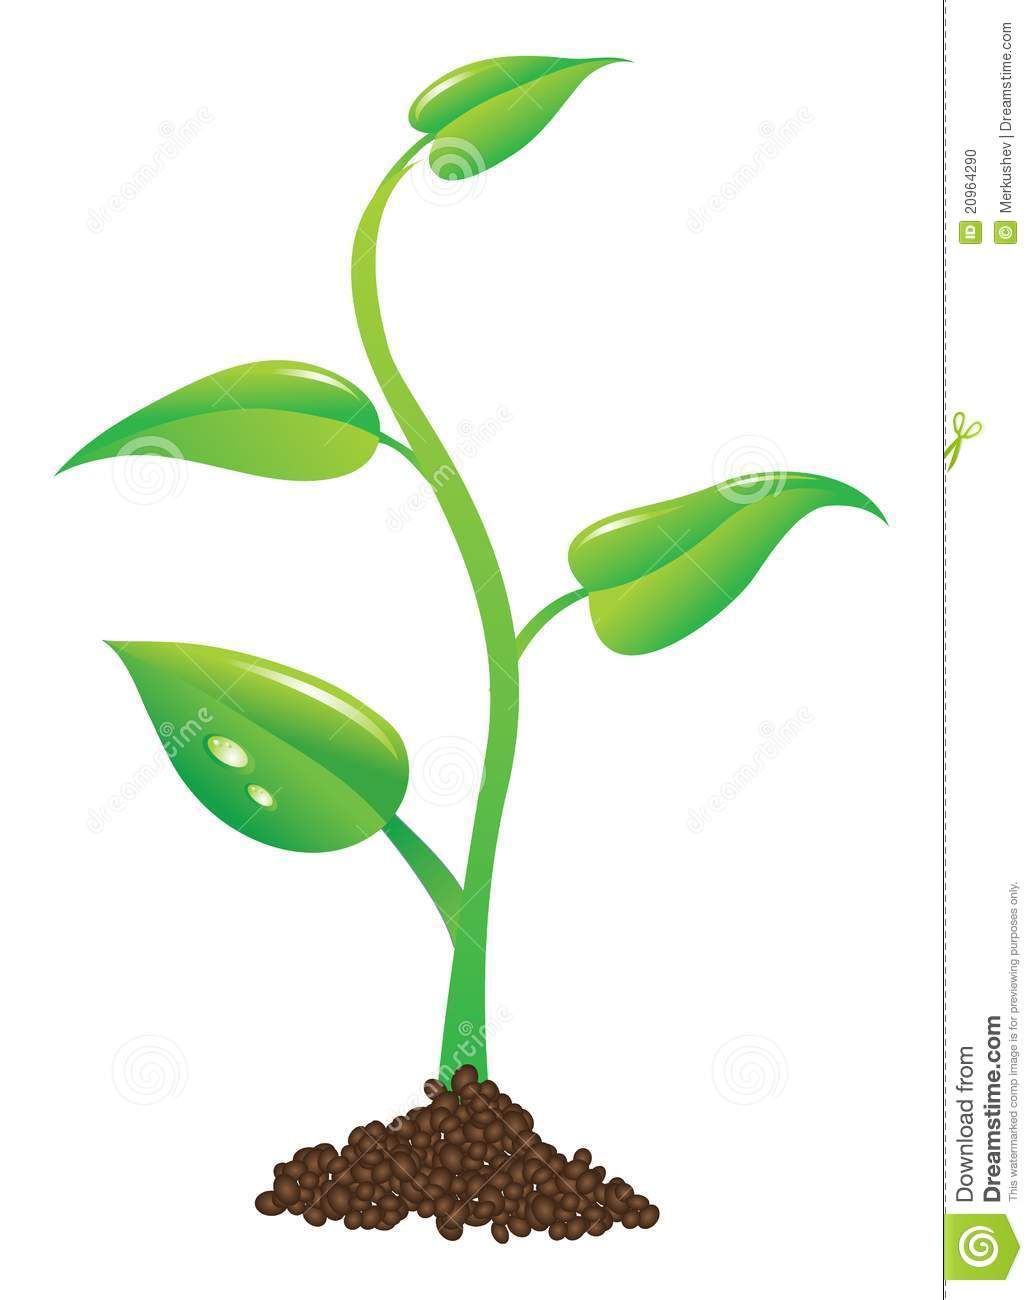 Sprout google search paddle. Seedling clipart healthy plant